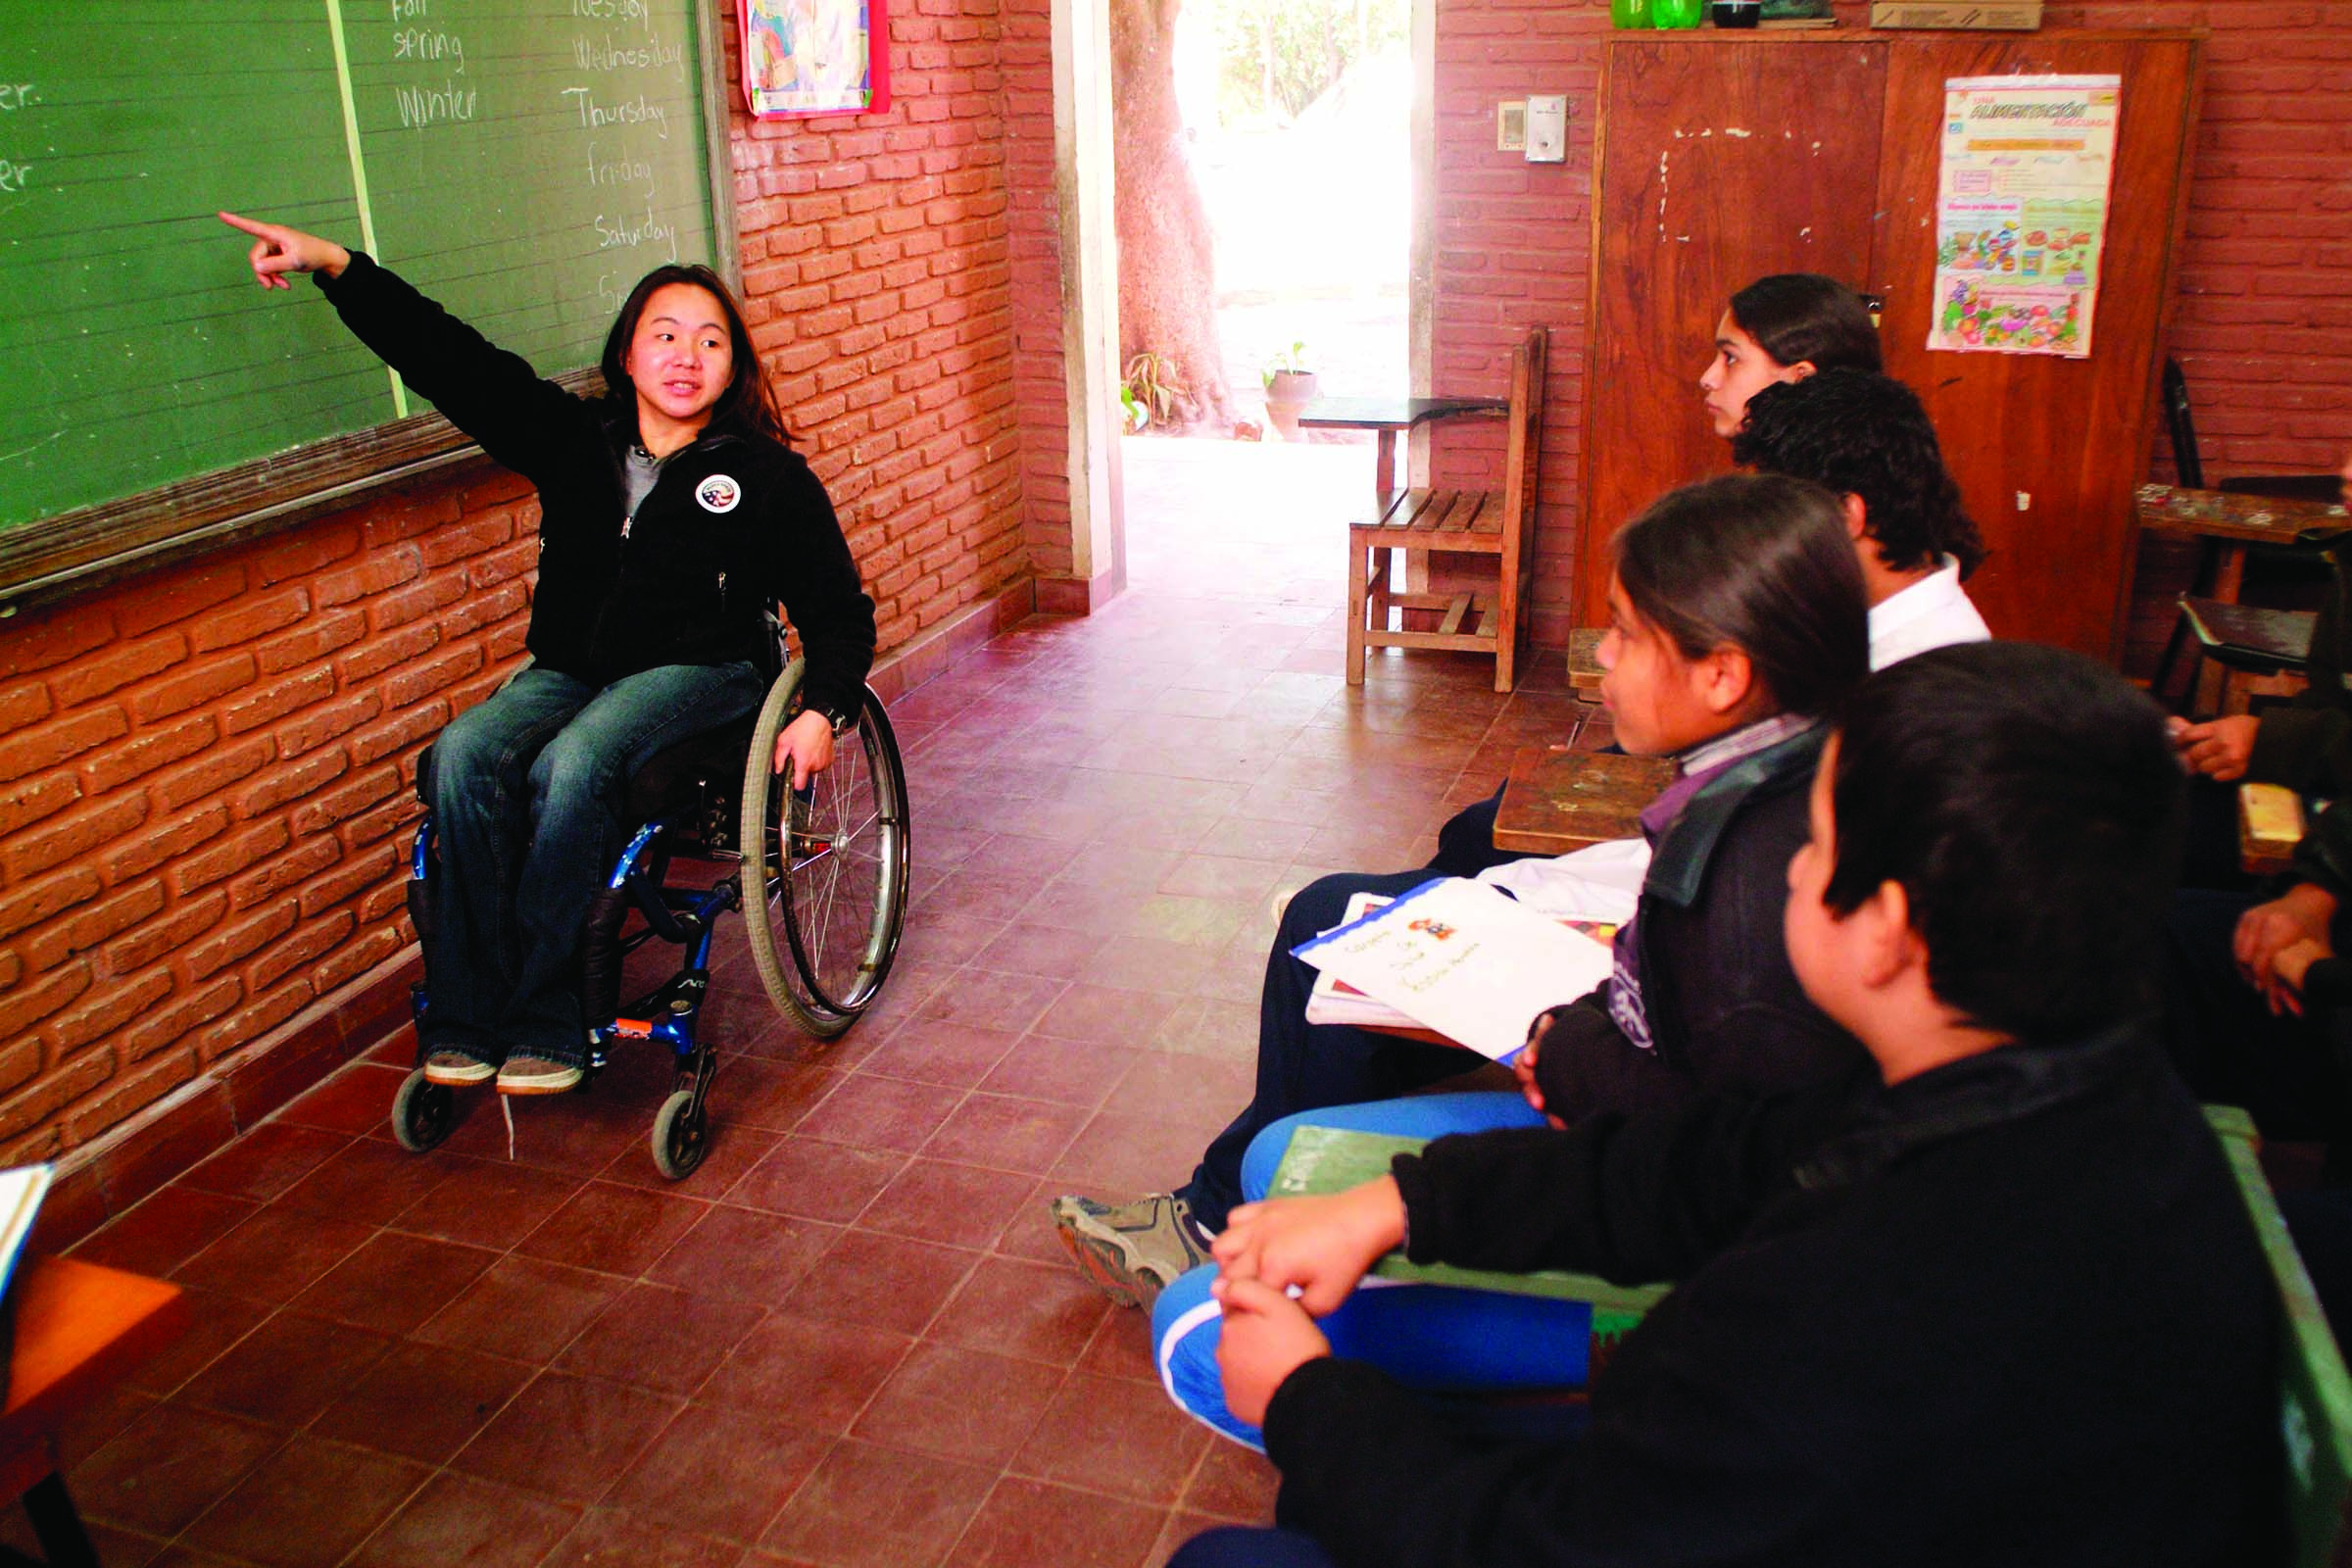 Source: Peace Corps, A Peace Corps Volunteer teaches English in Paraguay.